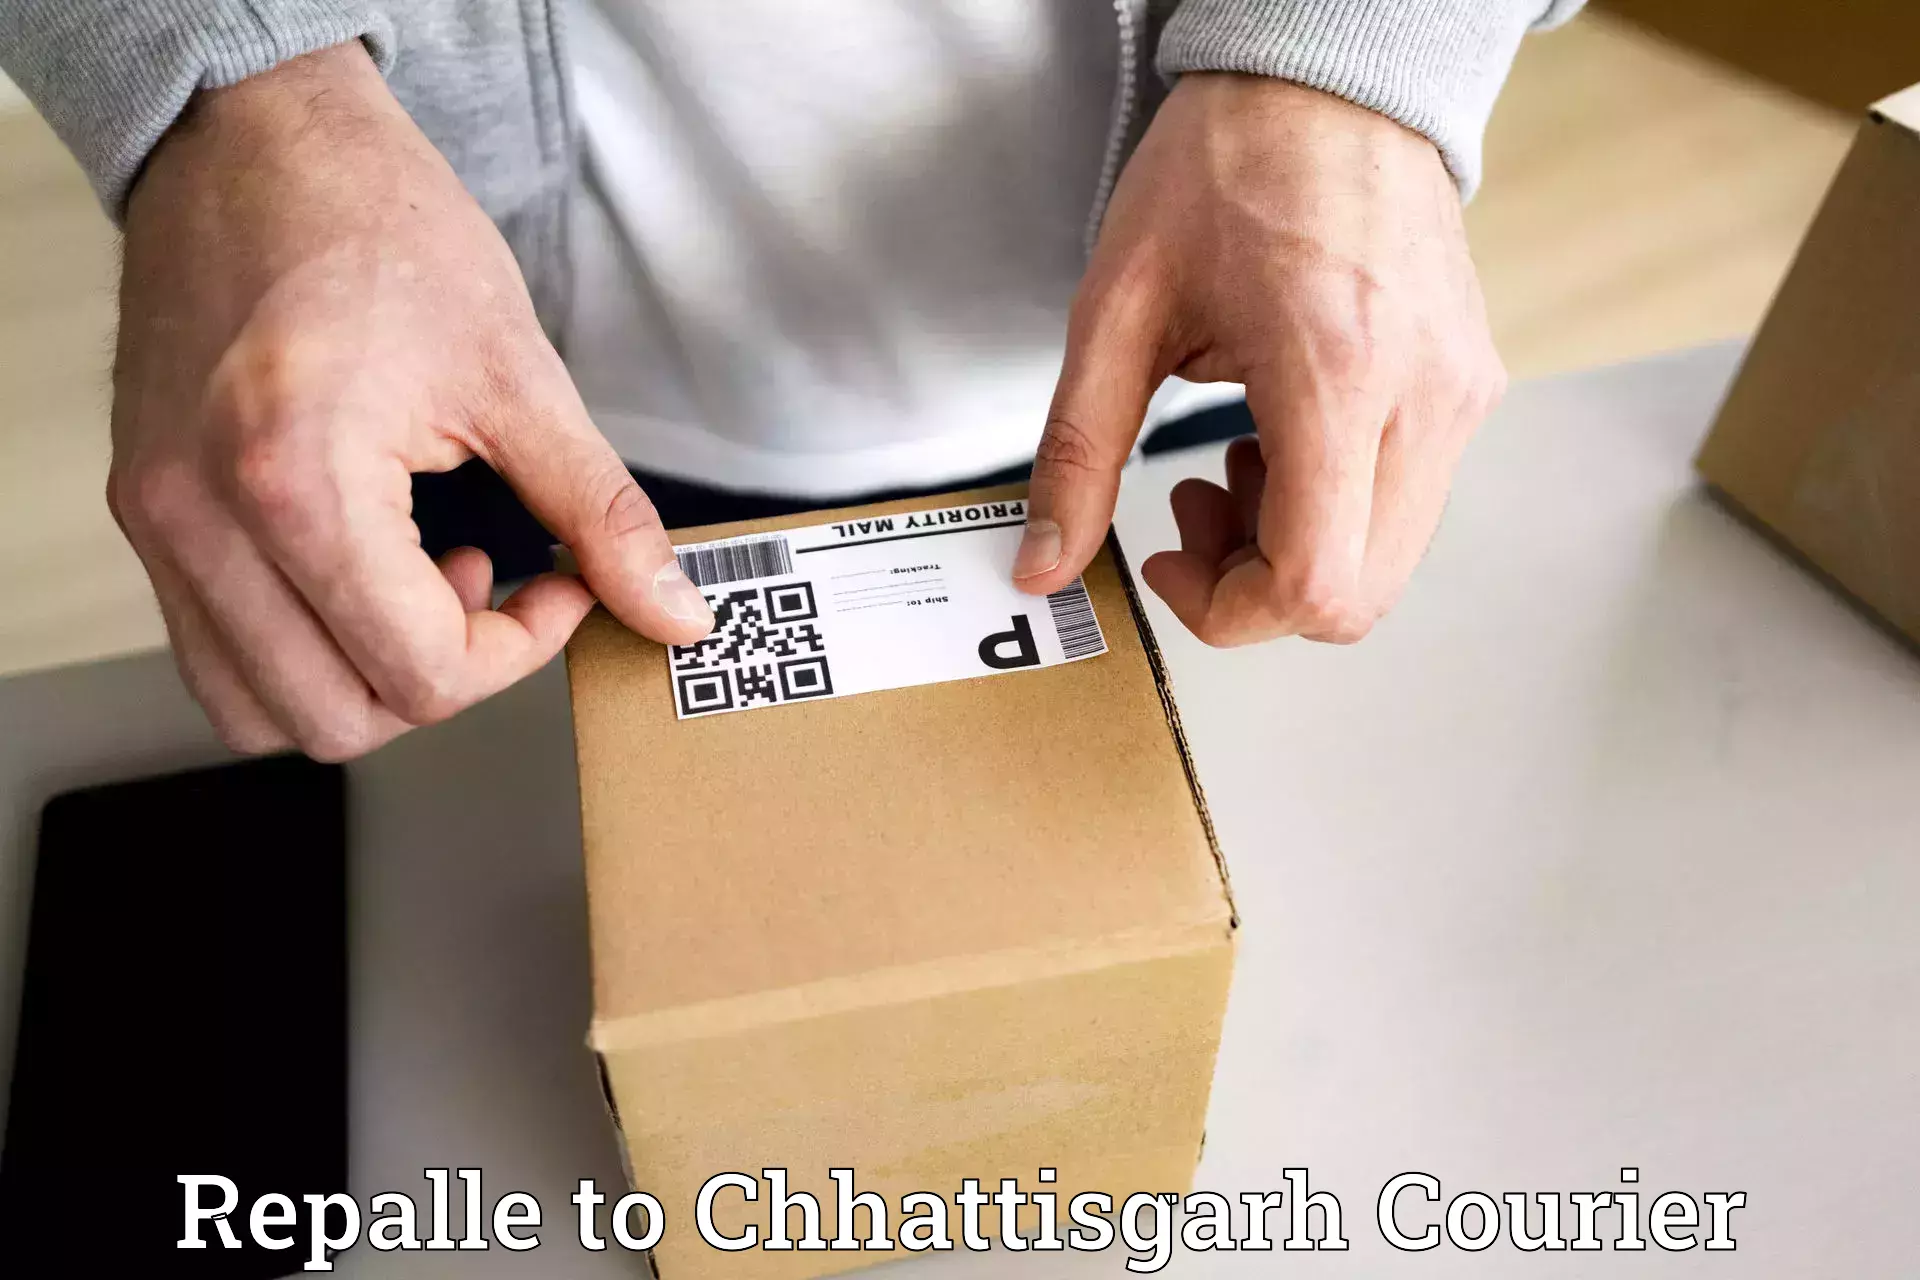 Next-day delivery options in Repalle to Chhattisgarh